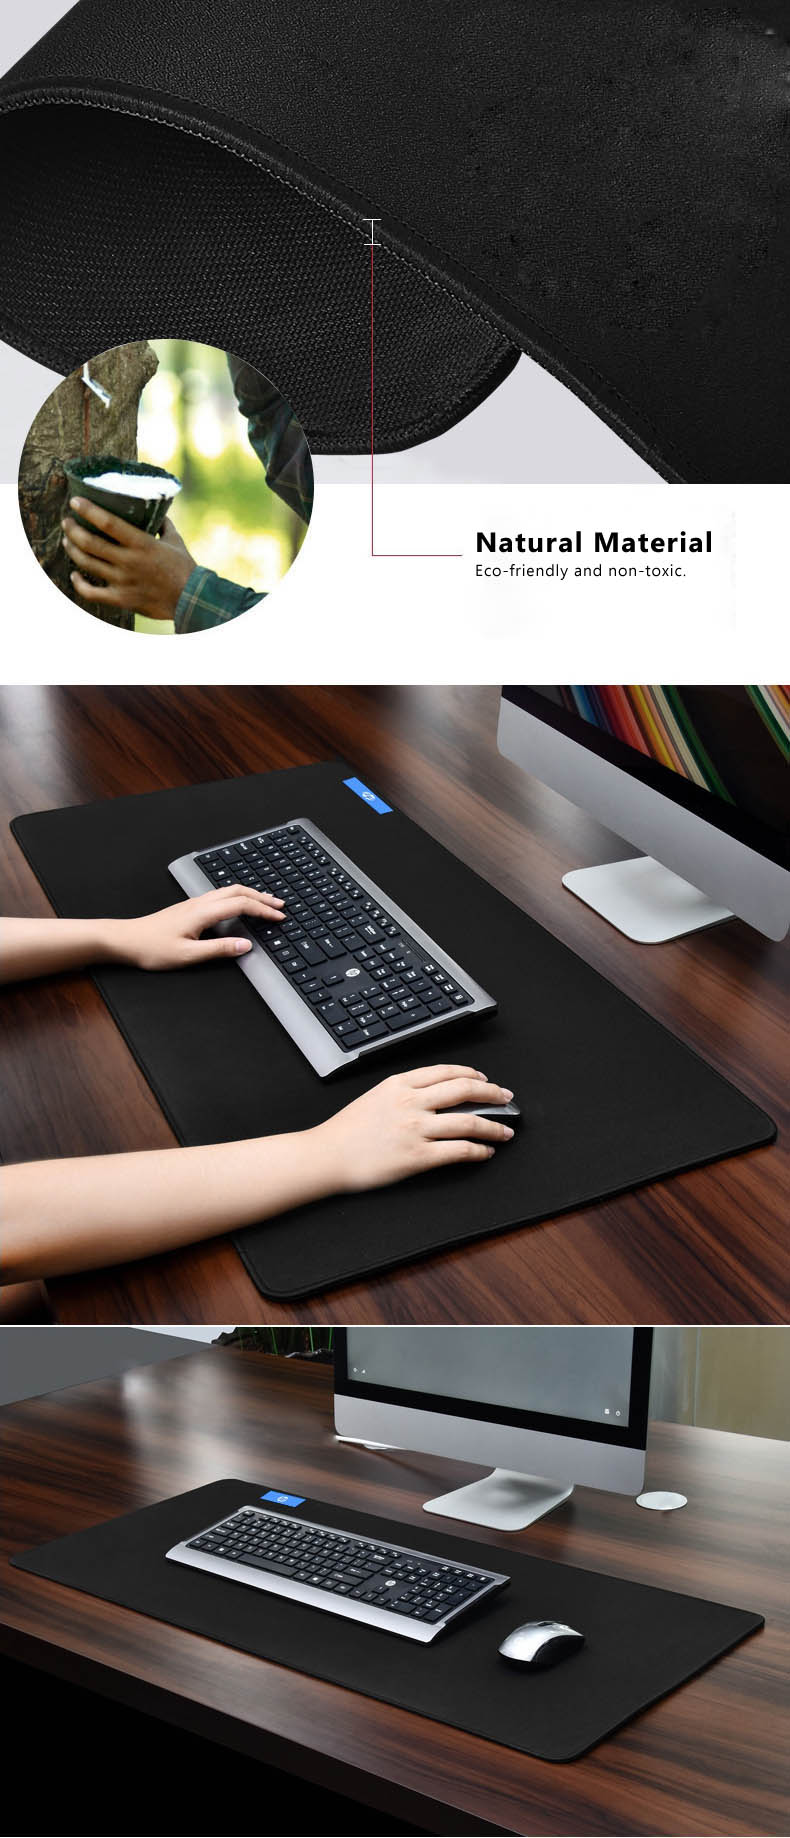 HPreg-700350mm-900400mm-3mm-Thicken-Large-Non-slip-Mouse-Pad-Keyboard-Mat-1276822